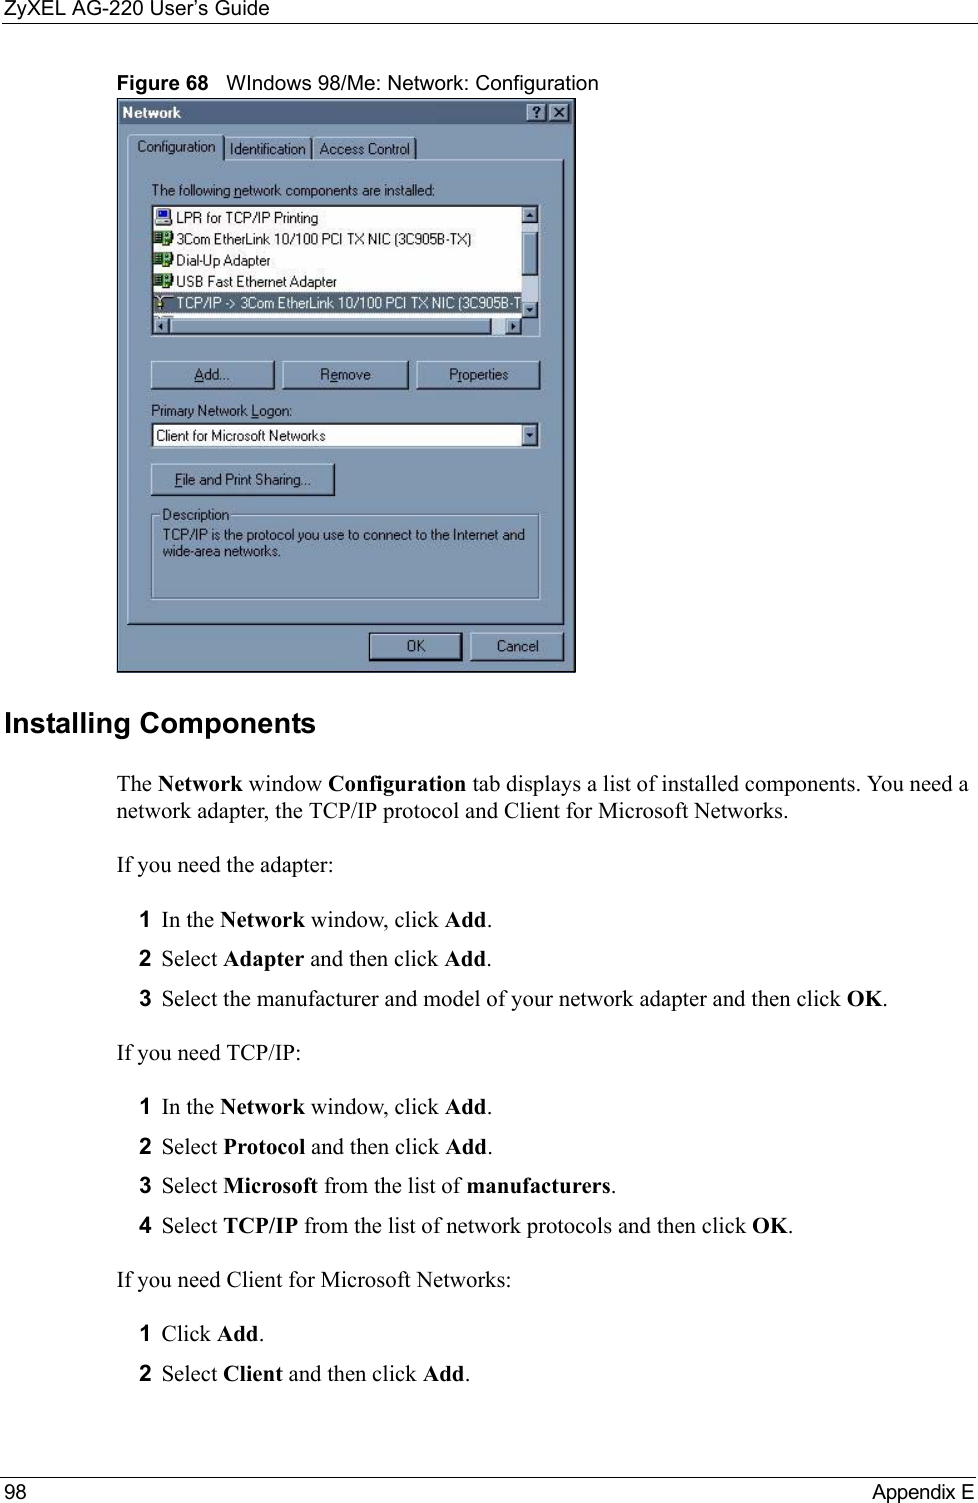 ZyXEL AG-220 User’s Guide98 Appendix EFigure 68   WIndows 98/Me: Network: ConfigurationInstalling ComponentsThe Network window Configuration tab displays a list of installed components. You need a network adapter, the TCP/IP protocol and Client for Microsoft Networks.If you need the adapter:1In the Network window, click Add.2Select Adapter and then click Add.3Select the manufacturer and model of your network adapter and then click OK.If you need TCP/IP:1In the Network window, click Add.2Select Protocol and then click Add.3Select Microsoft from the list of manufacturers.4Select TCP/IP from the list of network protocols and then click OK.If you need Client for Microsoft Networks:1Click Add.2Select Client and then click Add.